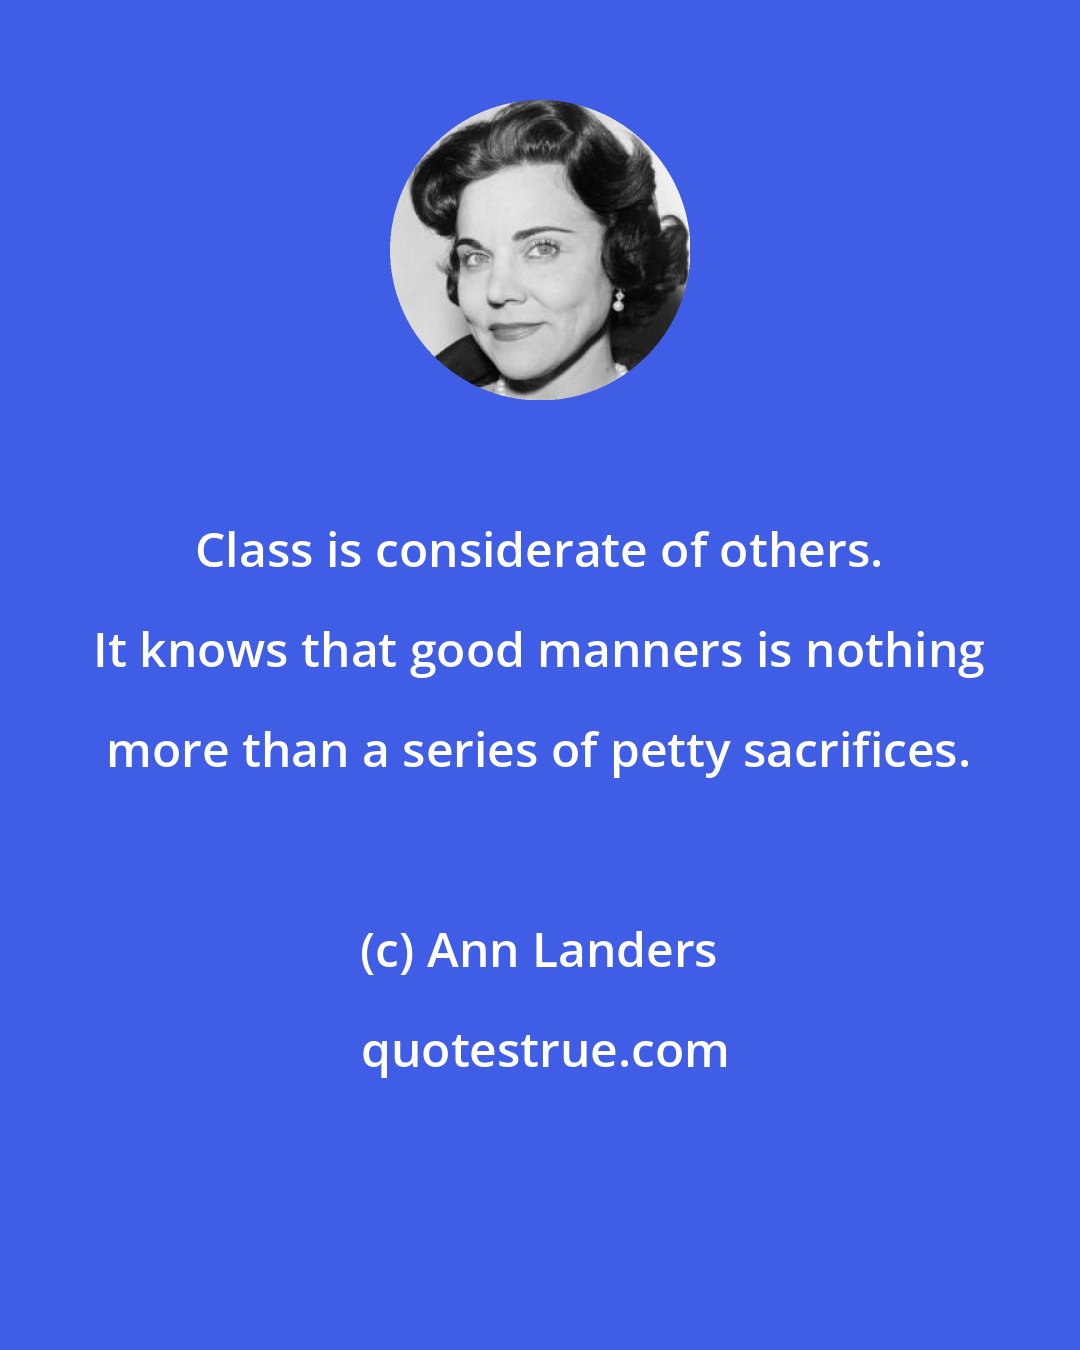 Ann Landers: Class is considerate of others. It knows that good manners is nothing more than a series of petty sacrifices.